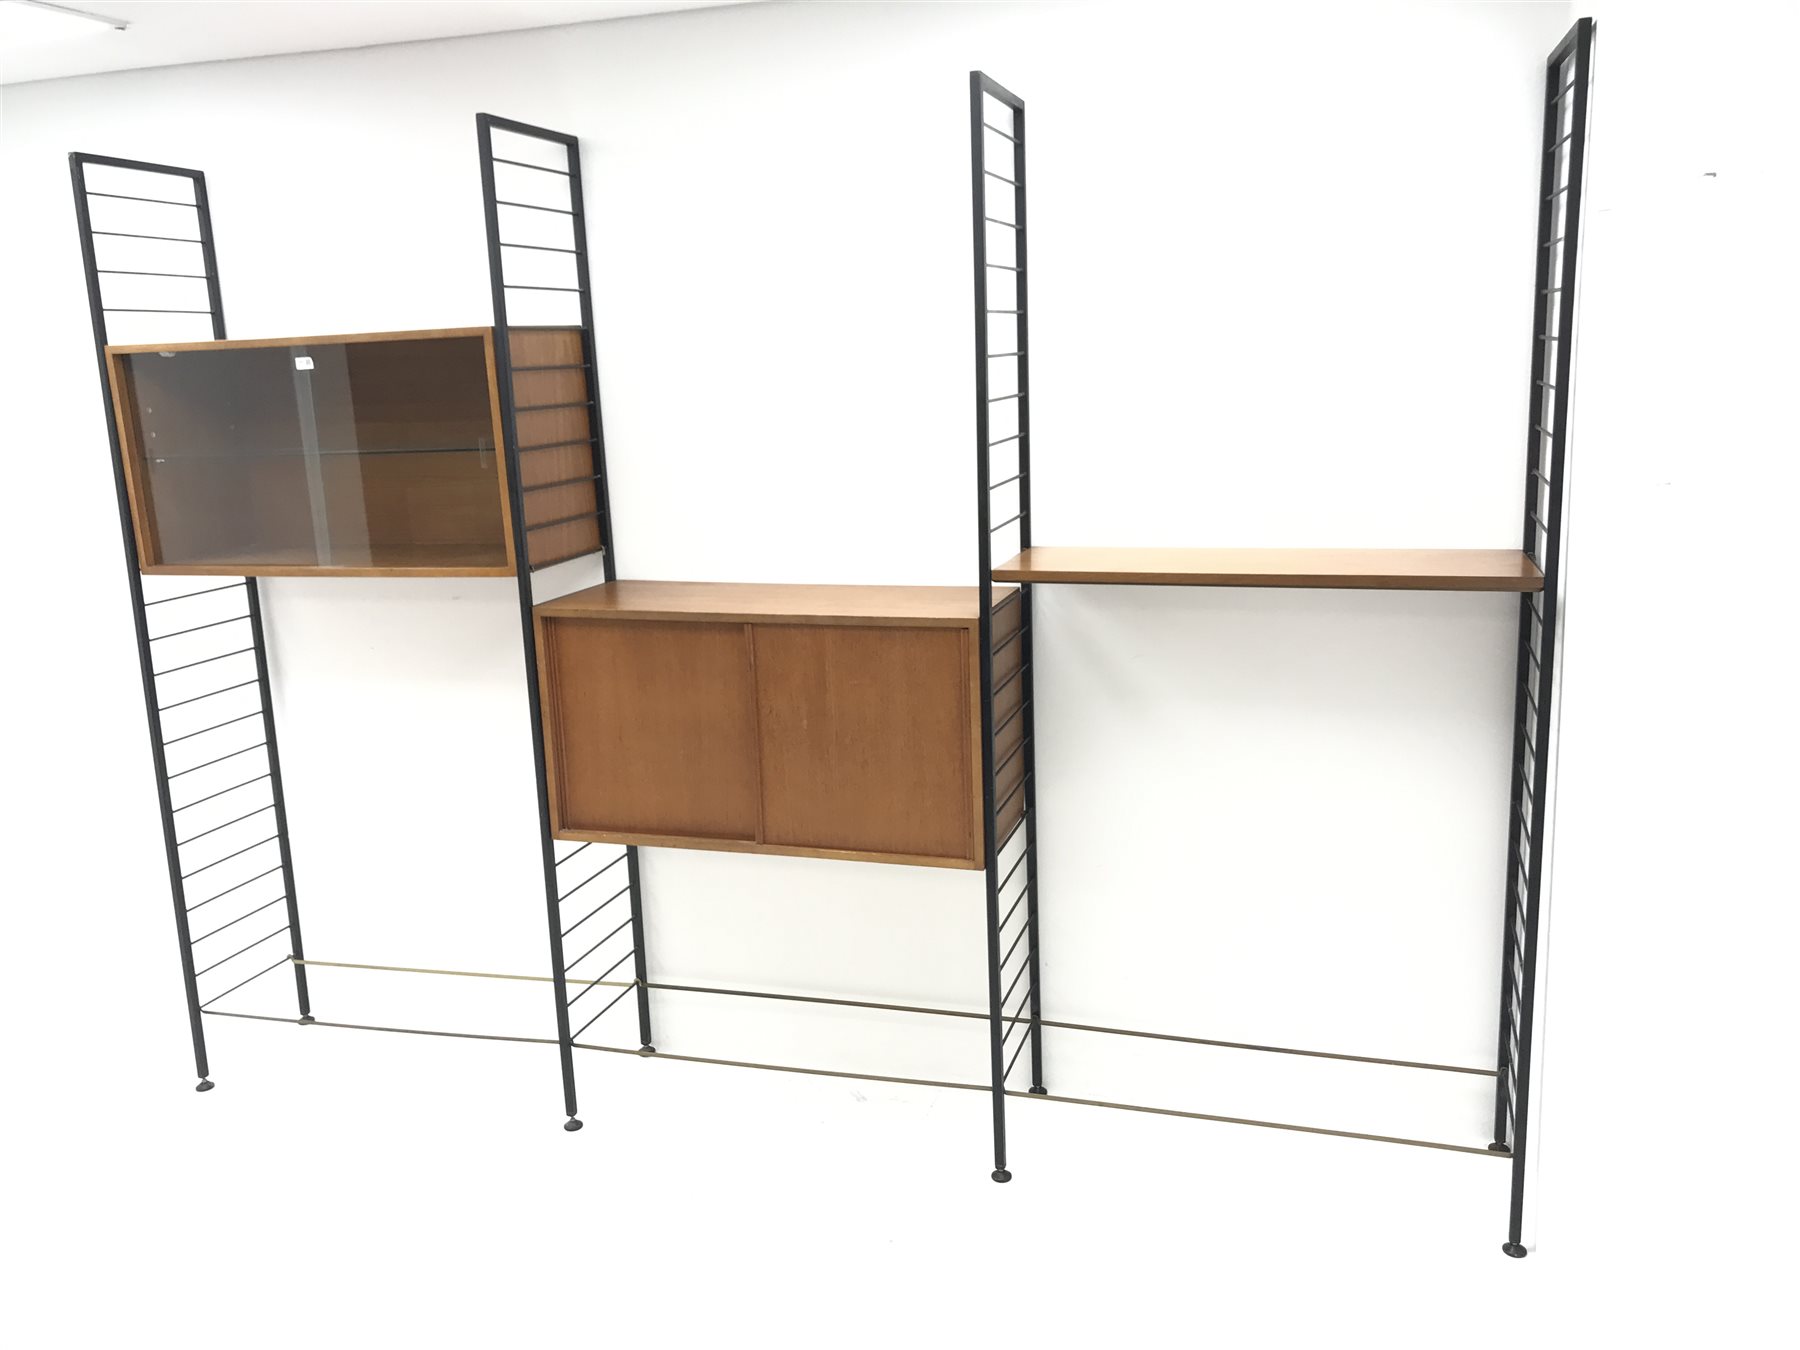 Staples Ladderax three bay sectional wall unit, two teak units comprising of solid and glazed slidin - Image 3 of 16